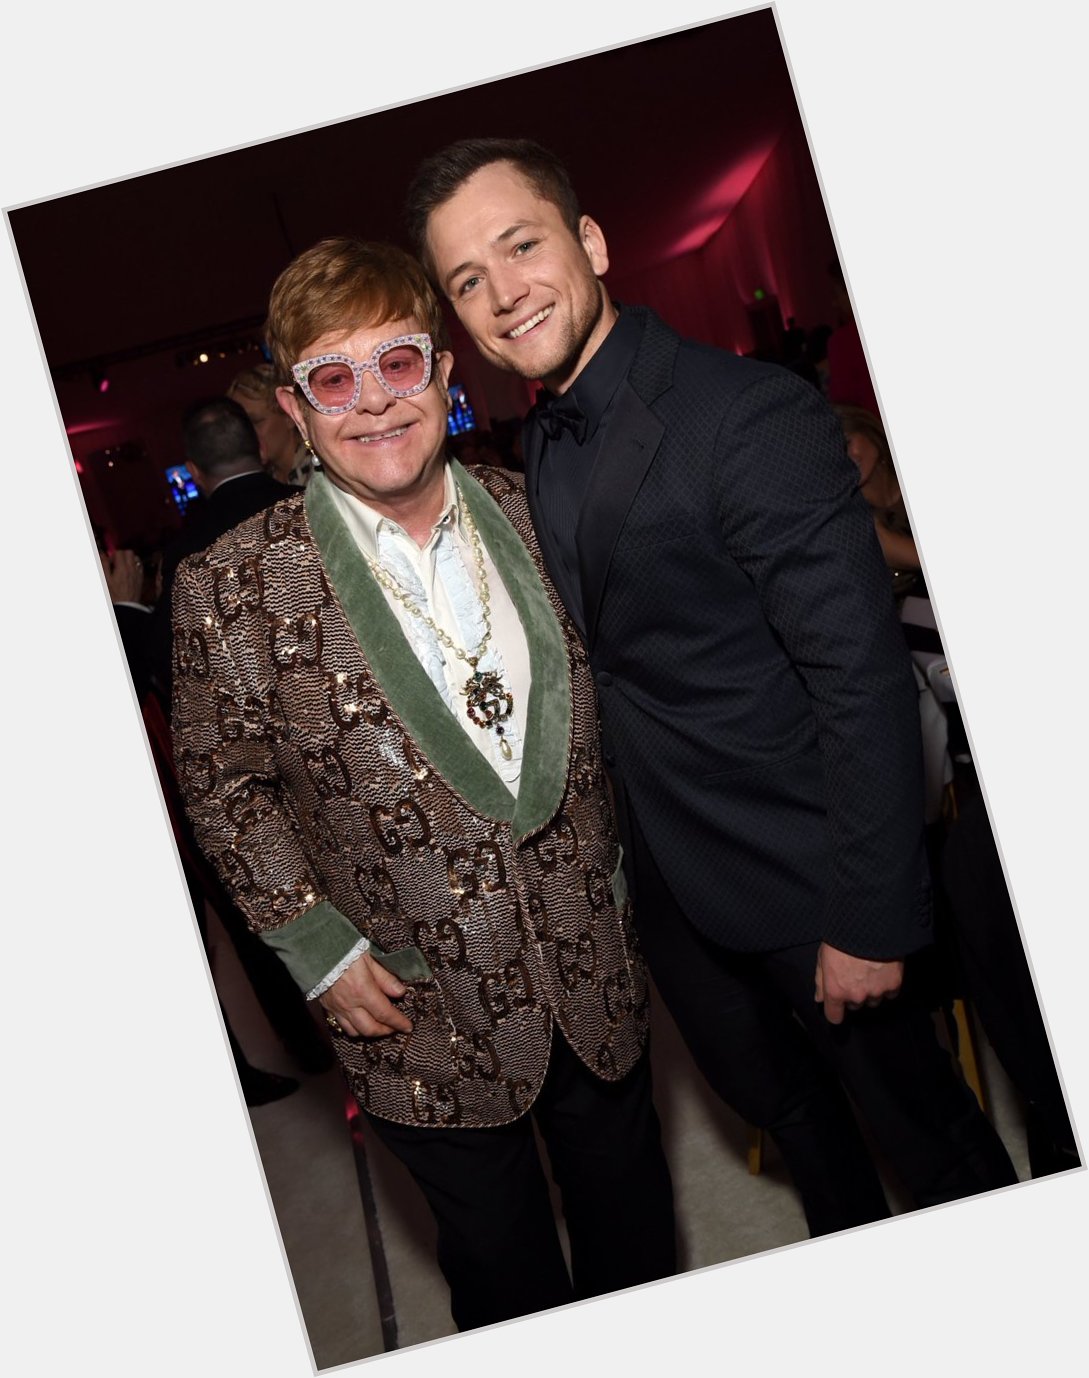 The biggest happy birthday to Sir Elton John! Rocketman will change everything for our guy this May. 